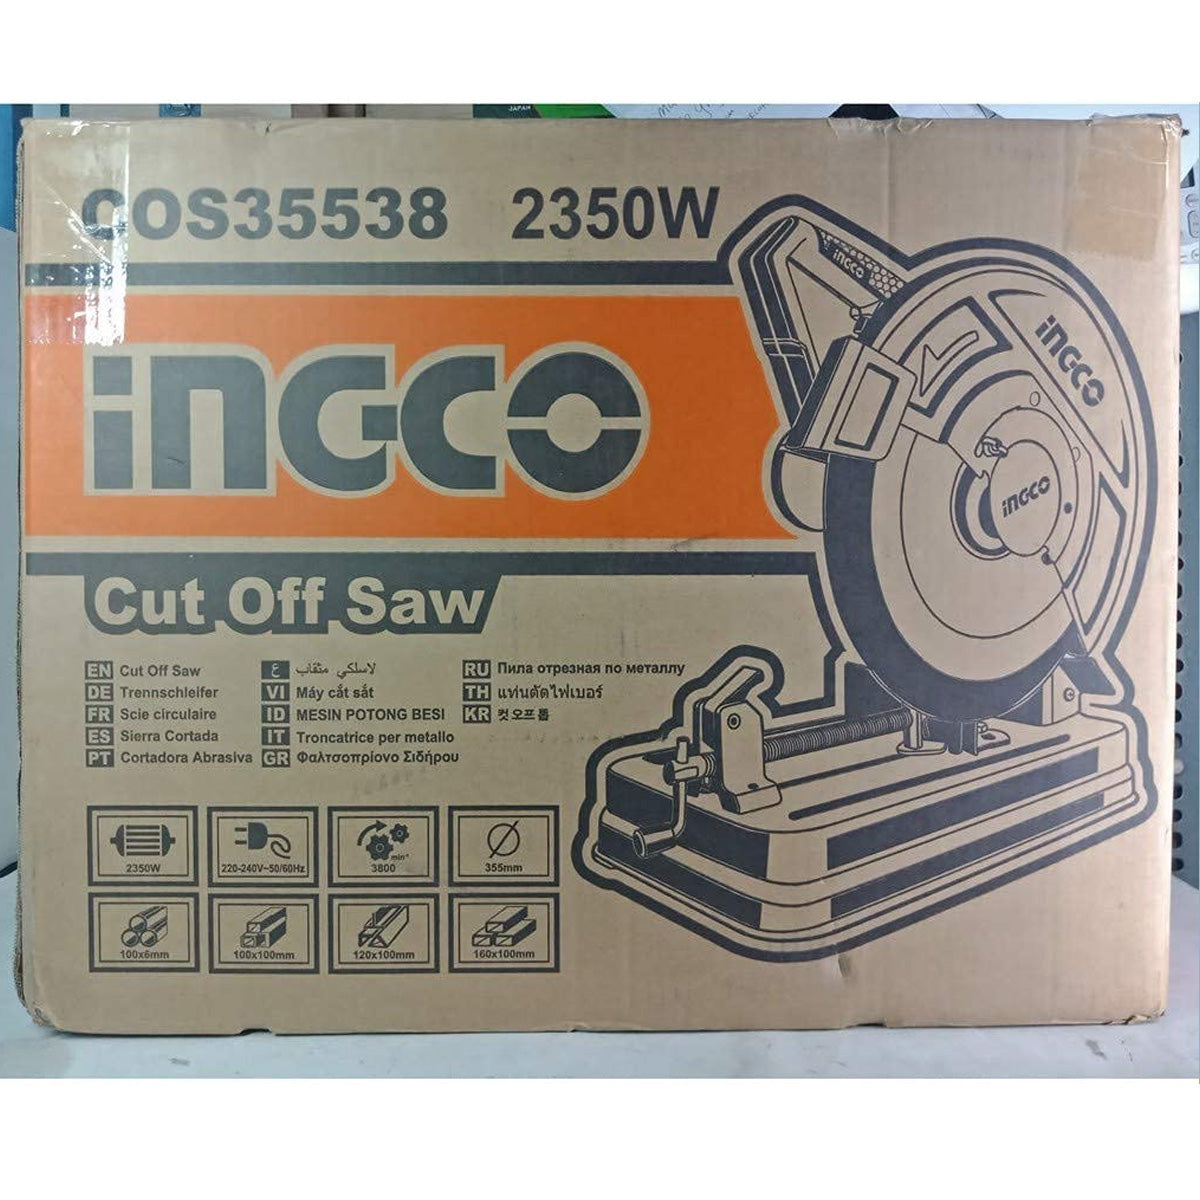 Ingco 355mm 2350W COS35538 Cut Off Saw - Powerful Corded Electric Tool for Precise Construction Cuts